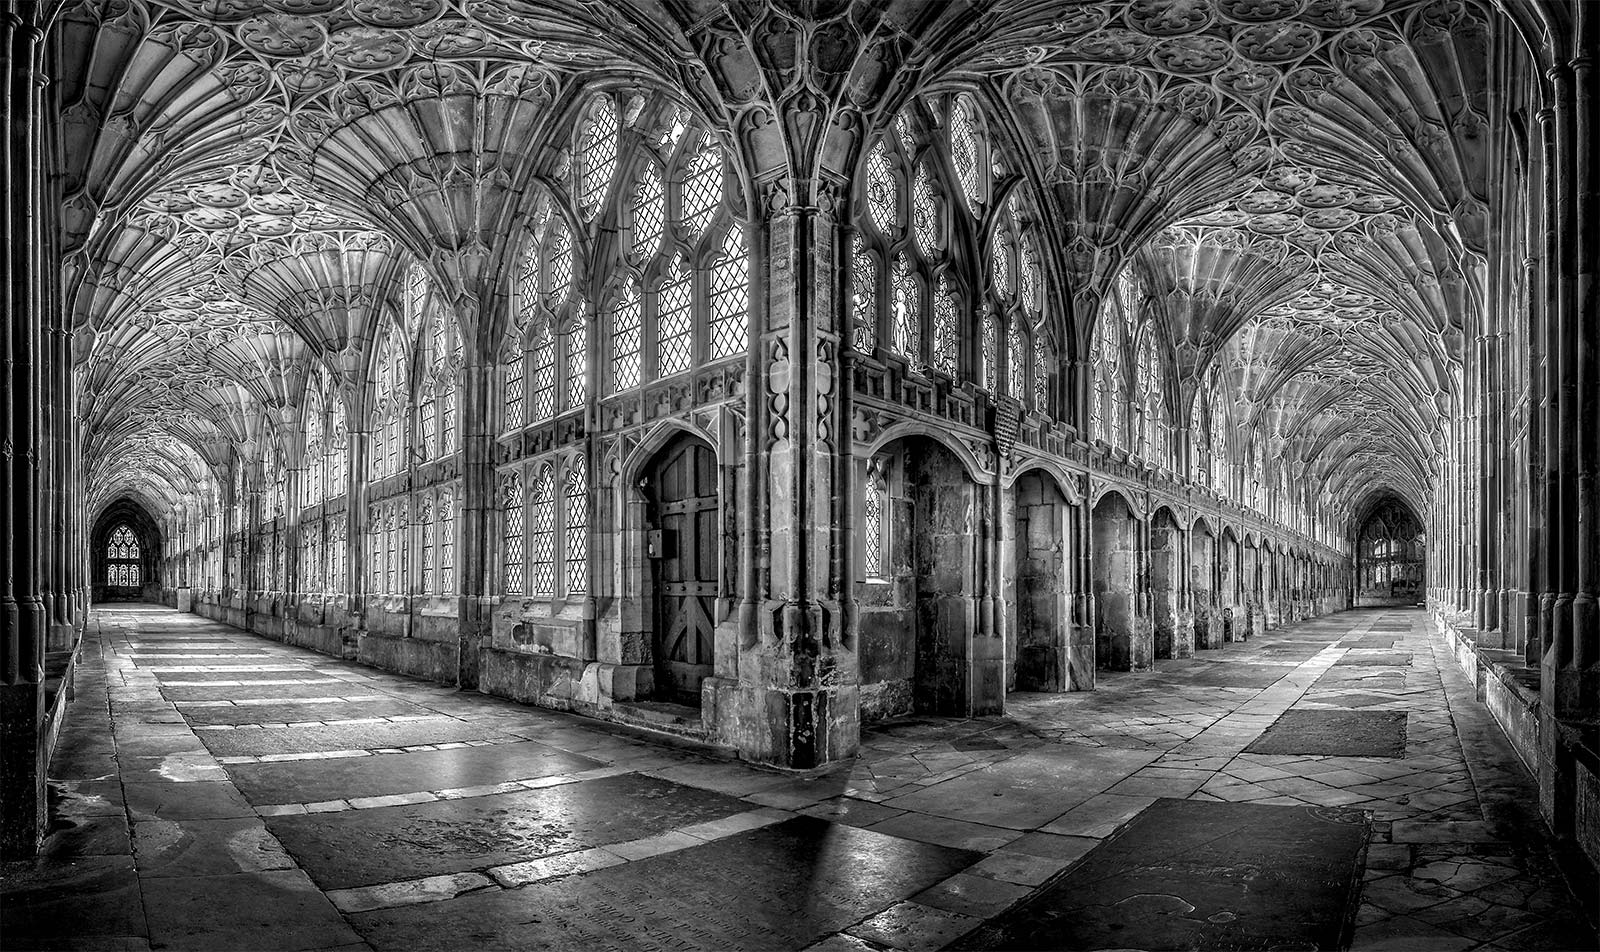 The cloisters at Gloucester Cathedral. Built between 1351 and 1357, likely under the direction of Thomas de Cantebrugge, they feature the earliest known example of fan vaulting.